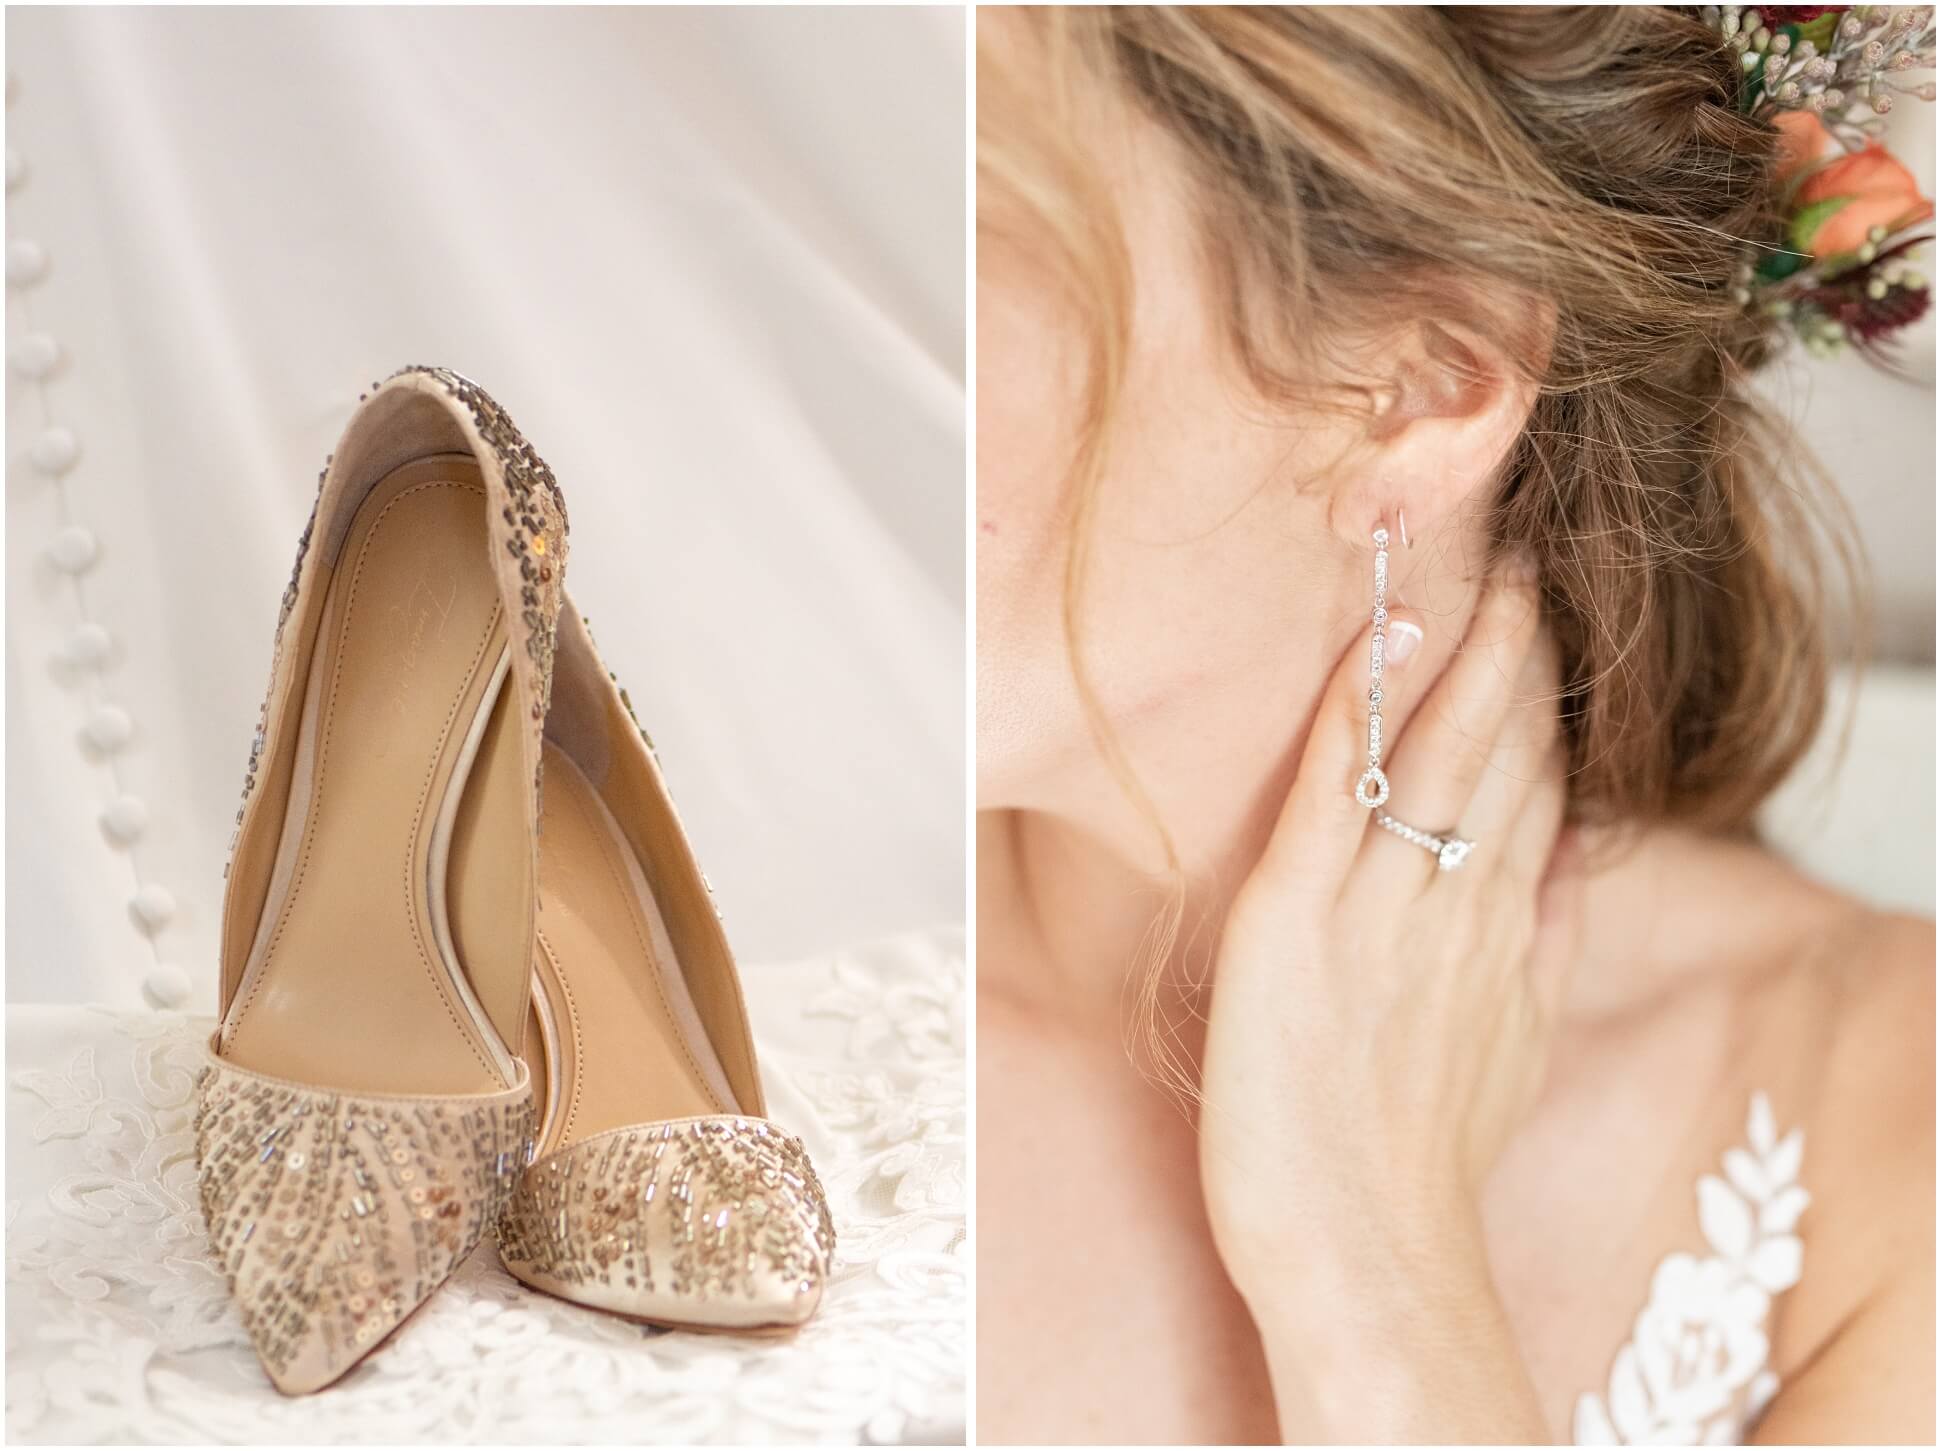 LEFT IMAGE; BRIDES GOLD SEQUENCED SHOES, RIGHT IMAGE: EARRINGS AND ENGAGEMENT RING ON BRIDE AT WINDING CREEK FARM, VIRGINIA